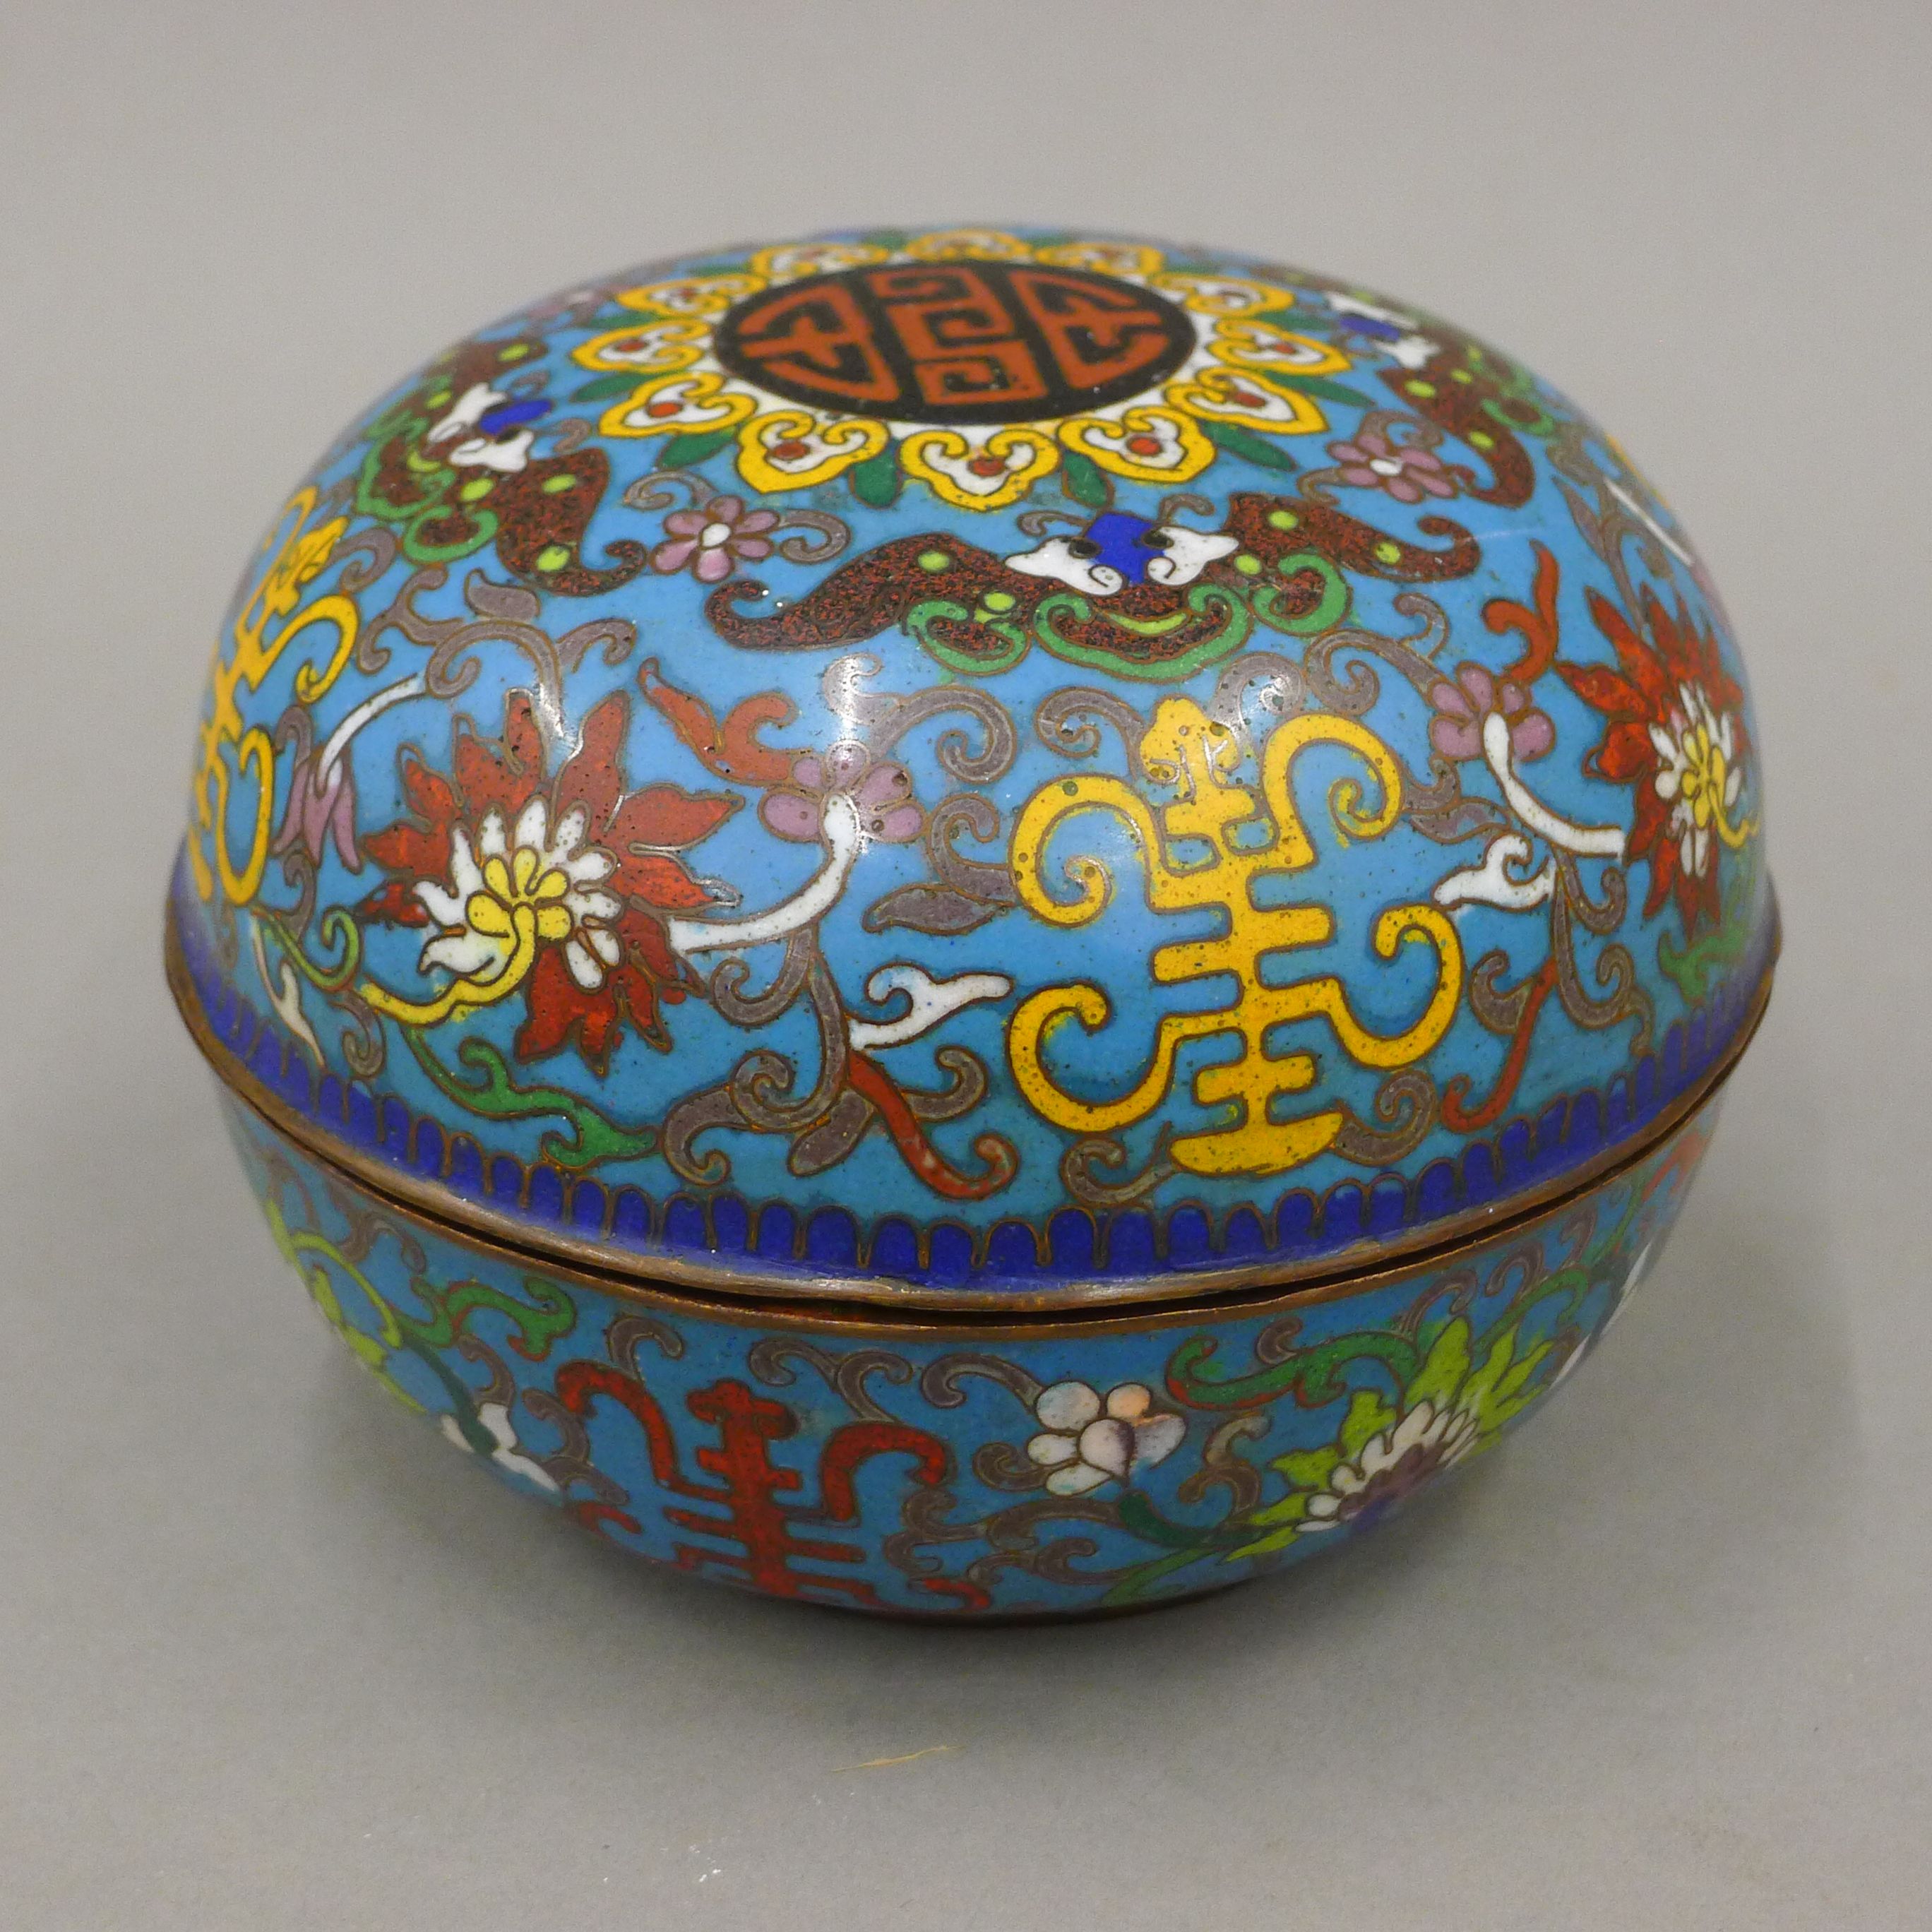 A 19th century Chinese blue ground bun shaped cloisonne box and cover, decorated with symbols,